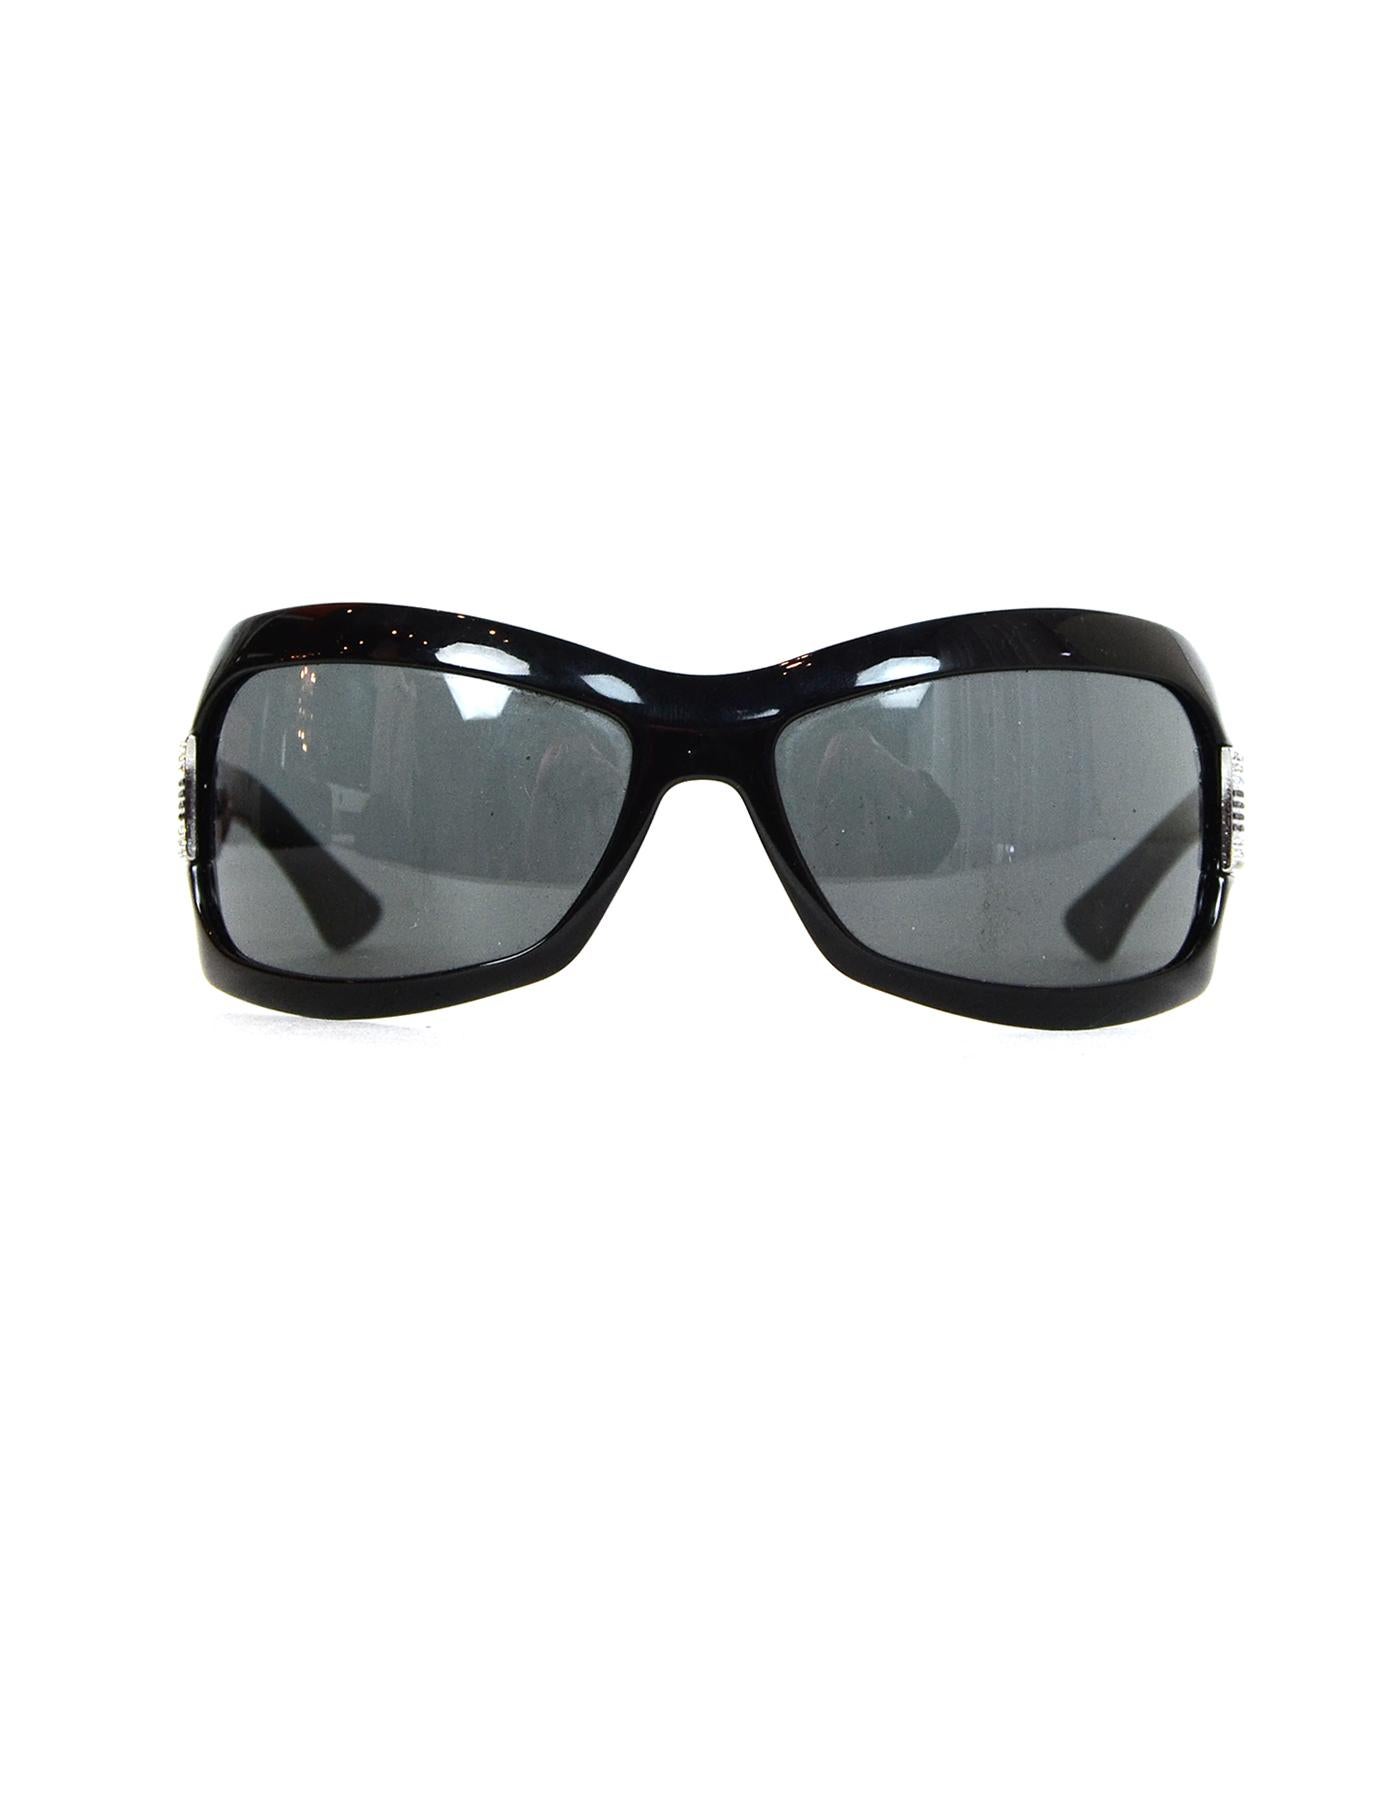 Gucci Black Sunglasses W/ Rhinestones On Arms & Case In Excellent Condition In New York, NY